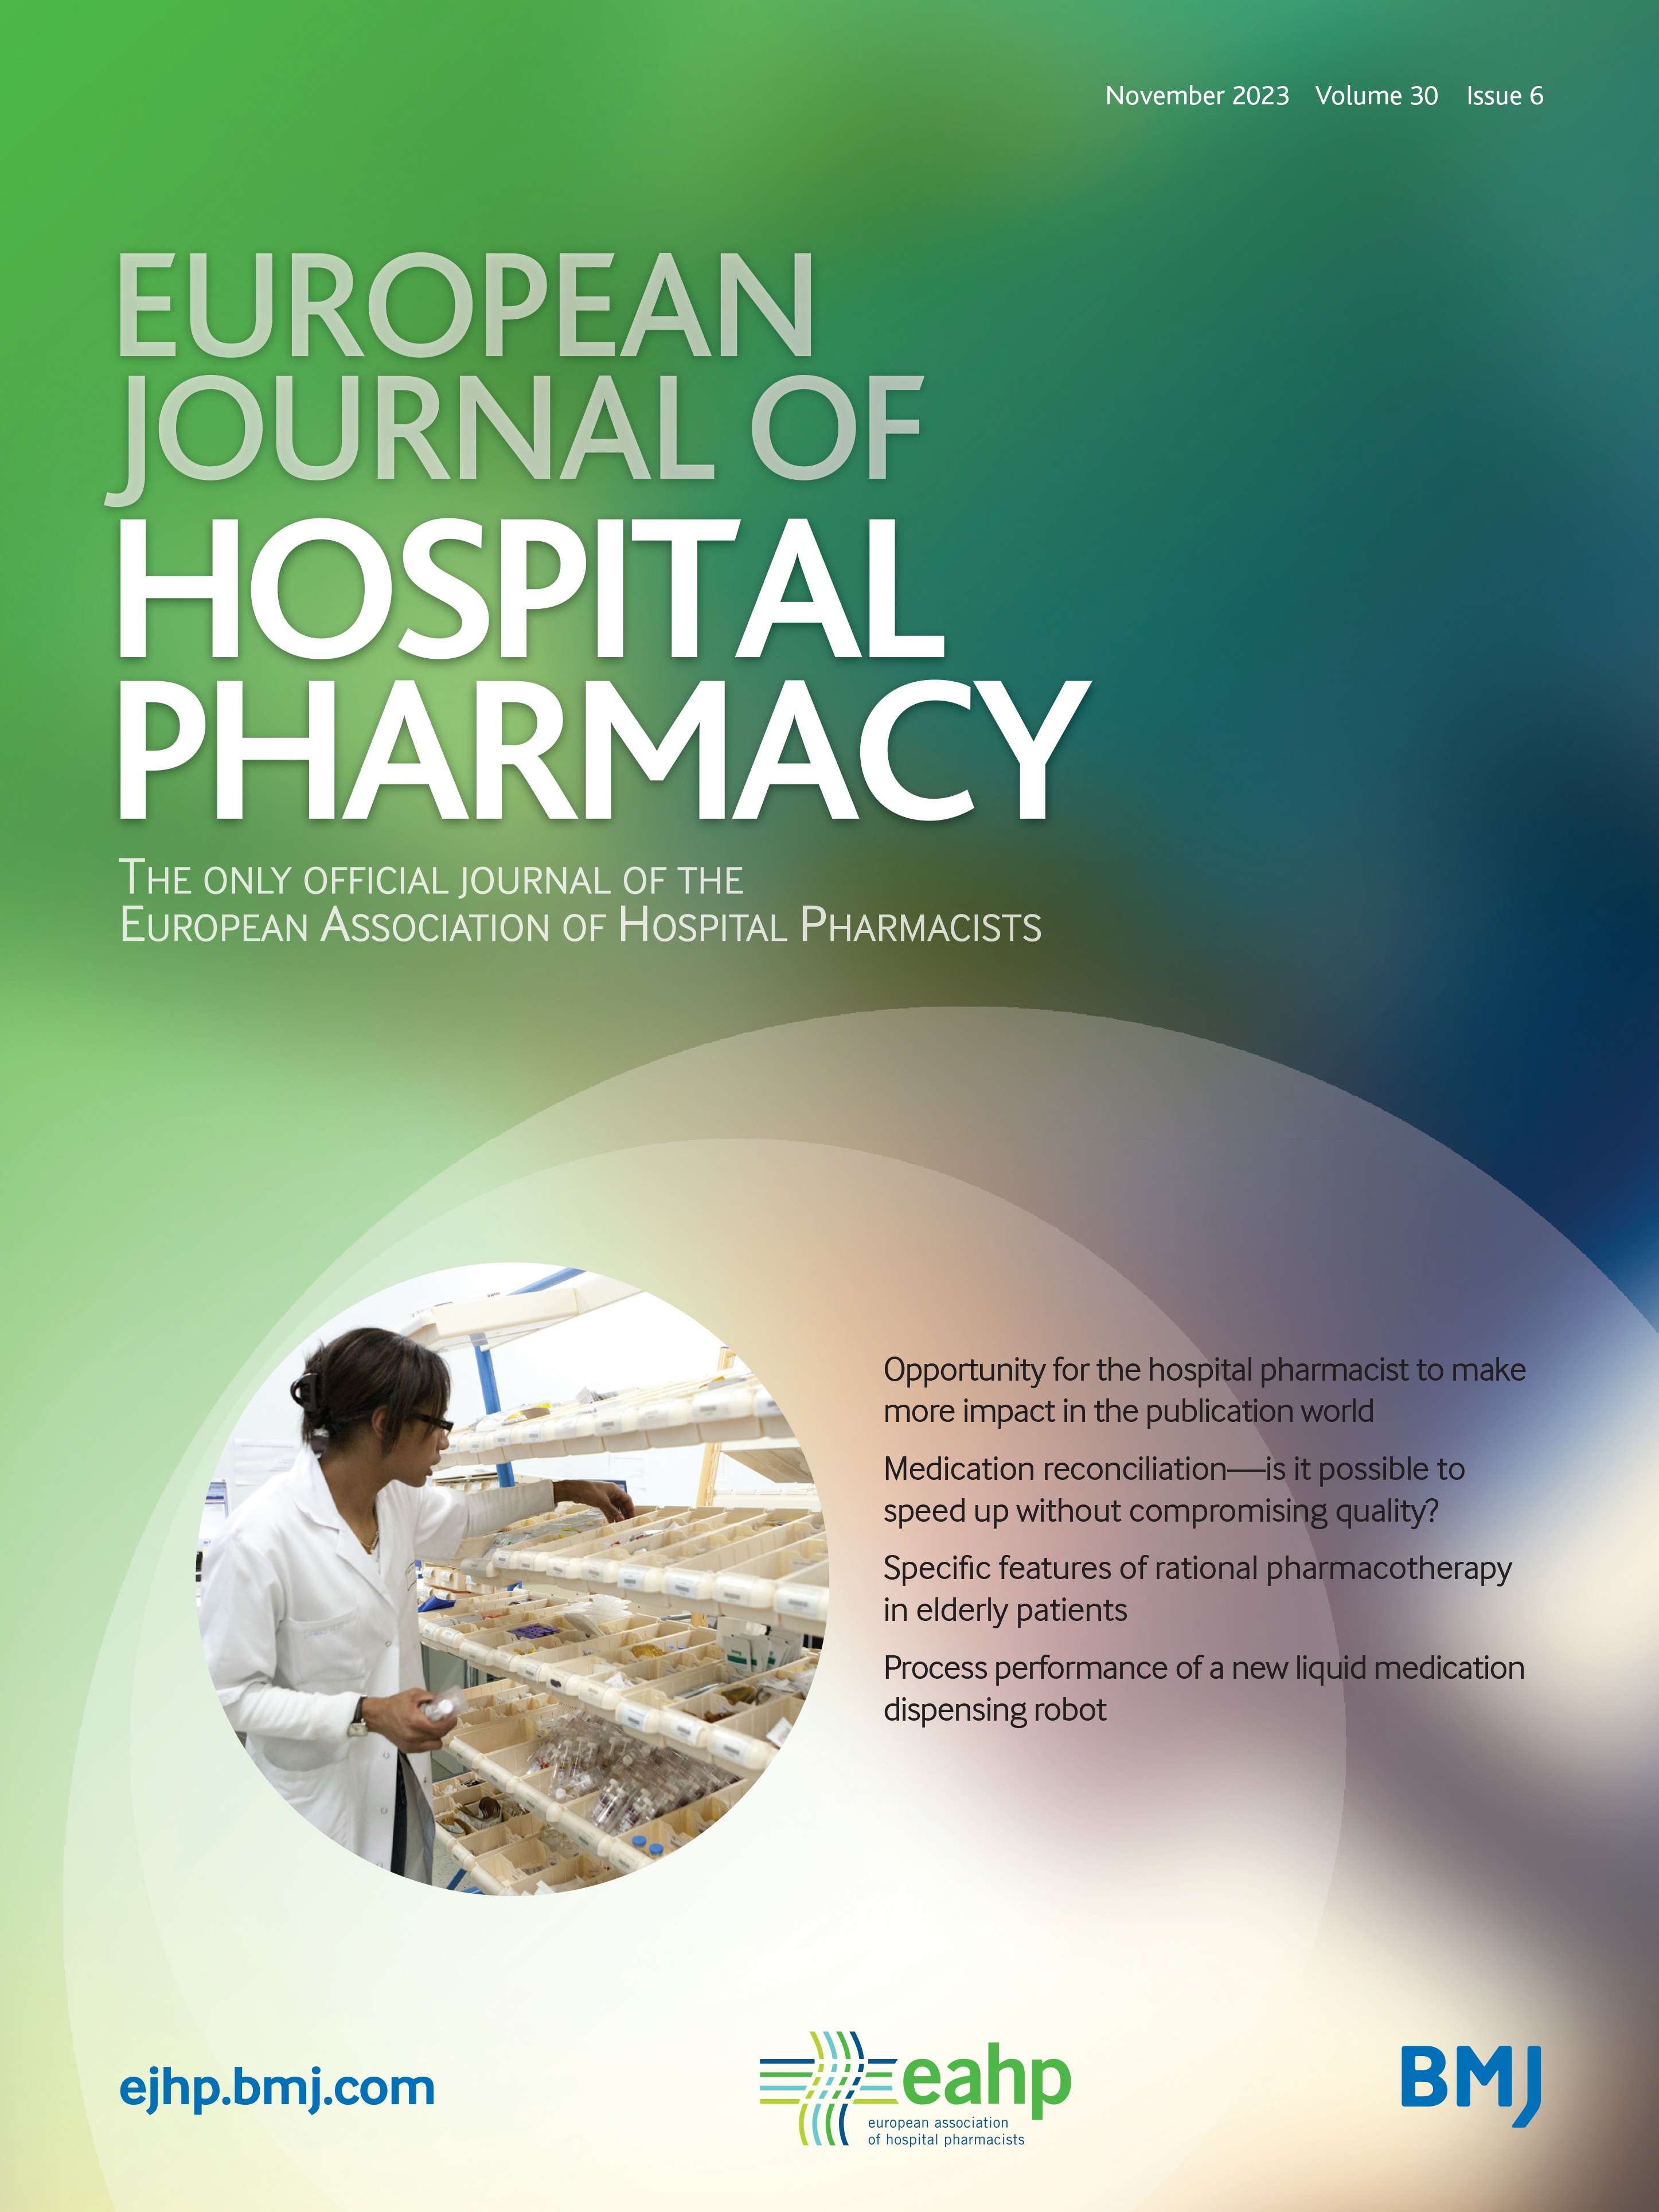 Specific features of rational pharmacotherapy in elderly patients